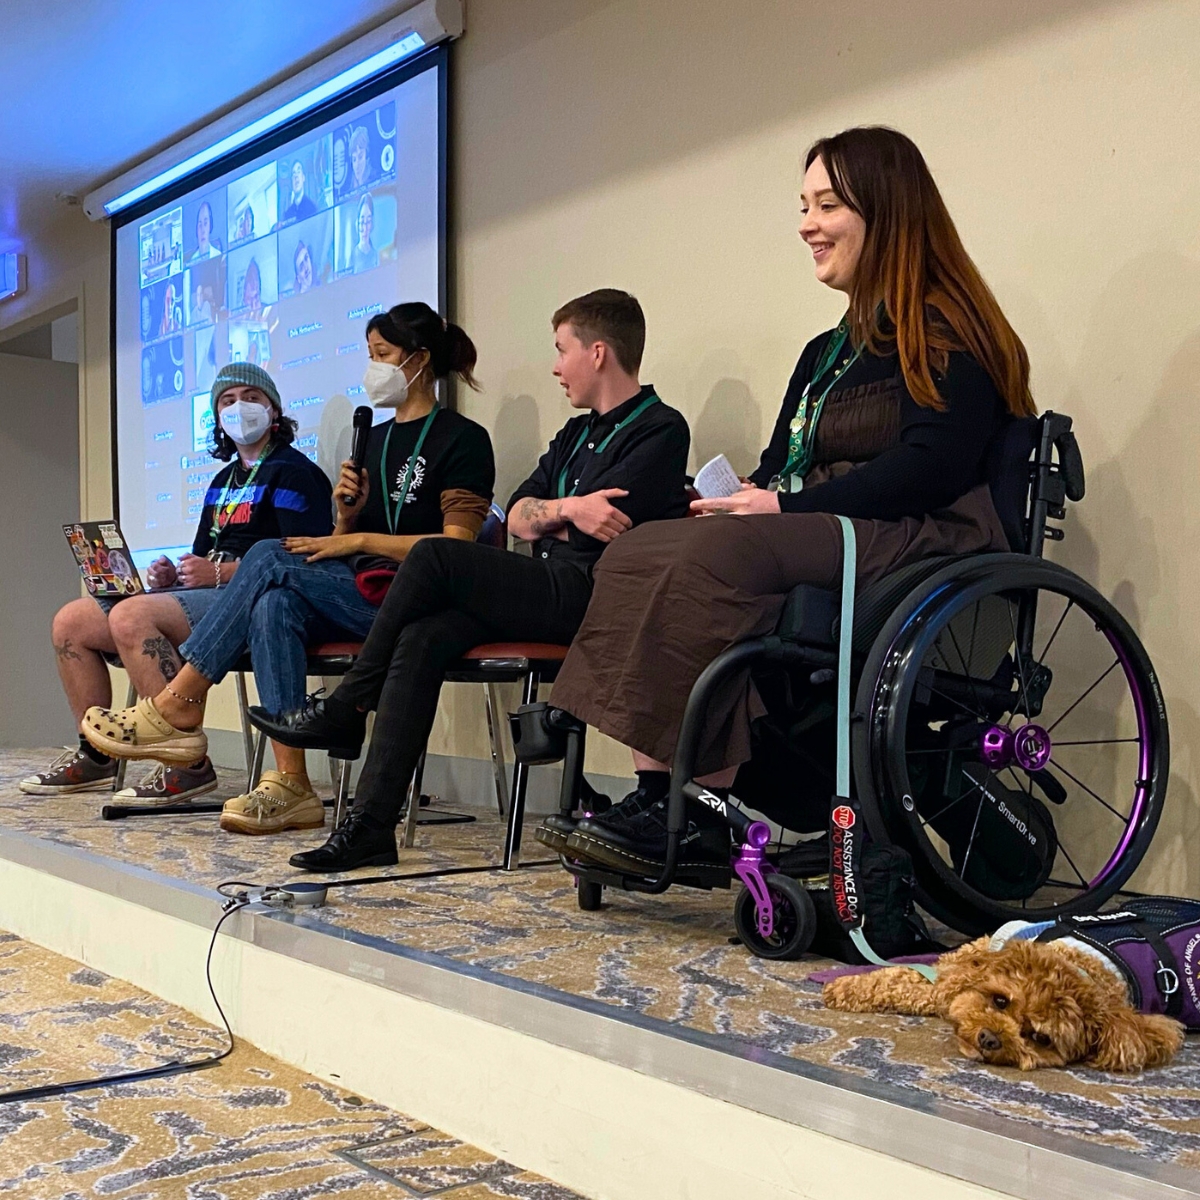 A panel of four young people speaking from a stage. The woman on the right is using a manual wheelchair and has a service dog lying next to her. The two people on the left are wearing face masks. Behind them is a projector screen with lots of people in a Zoom meeting.